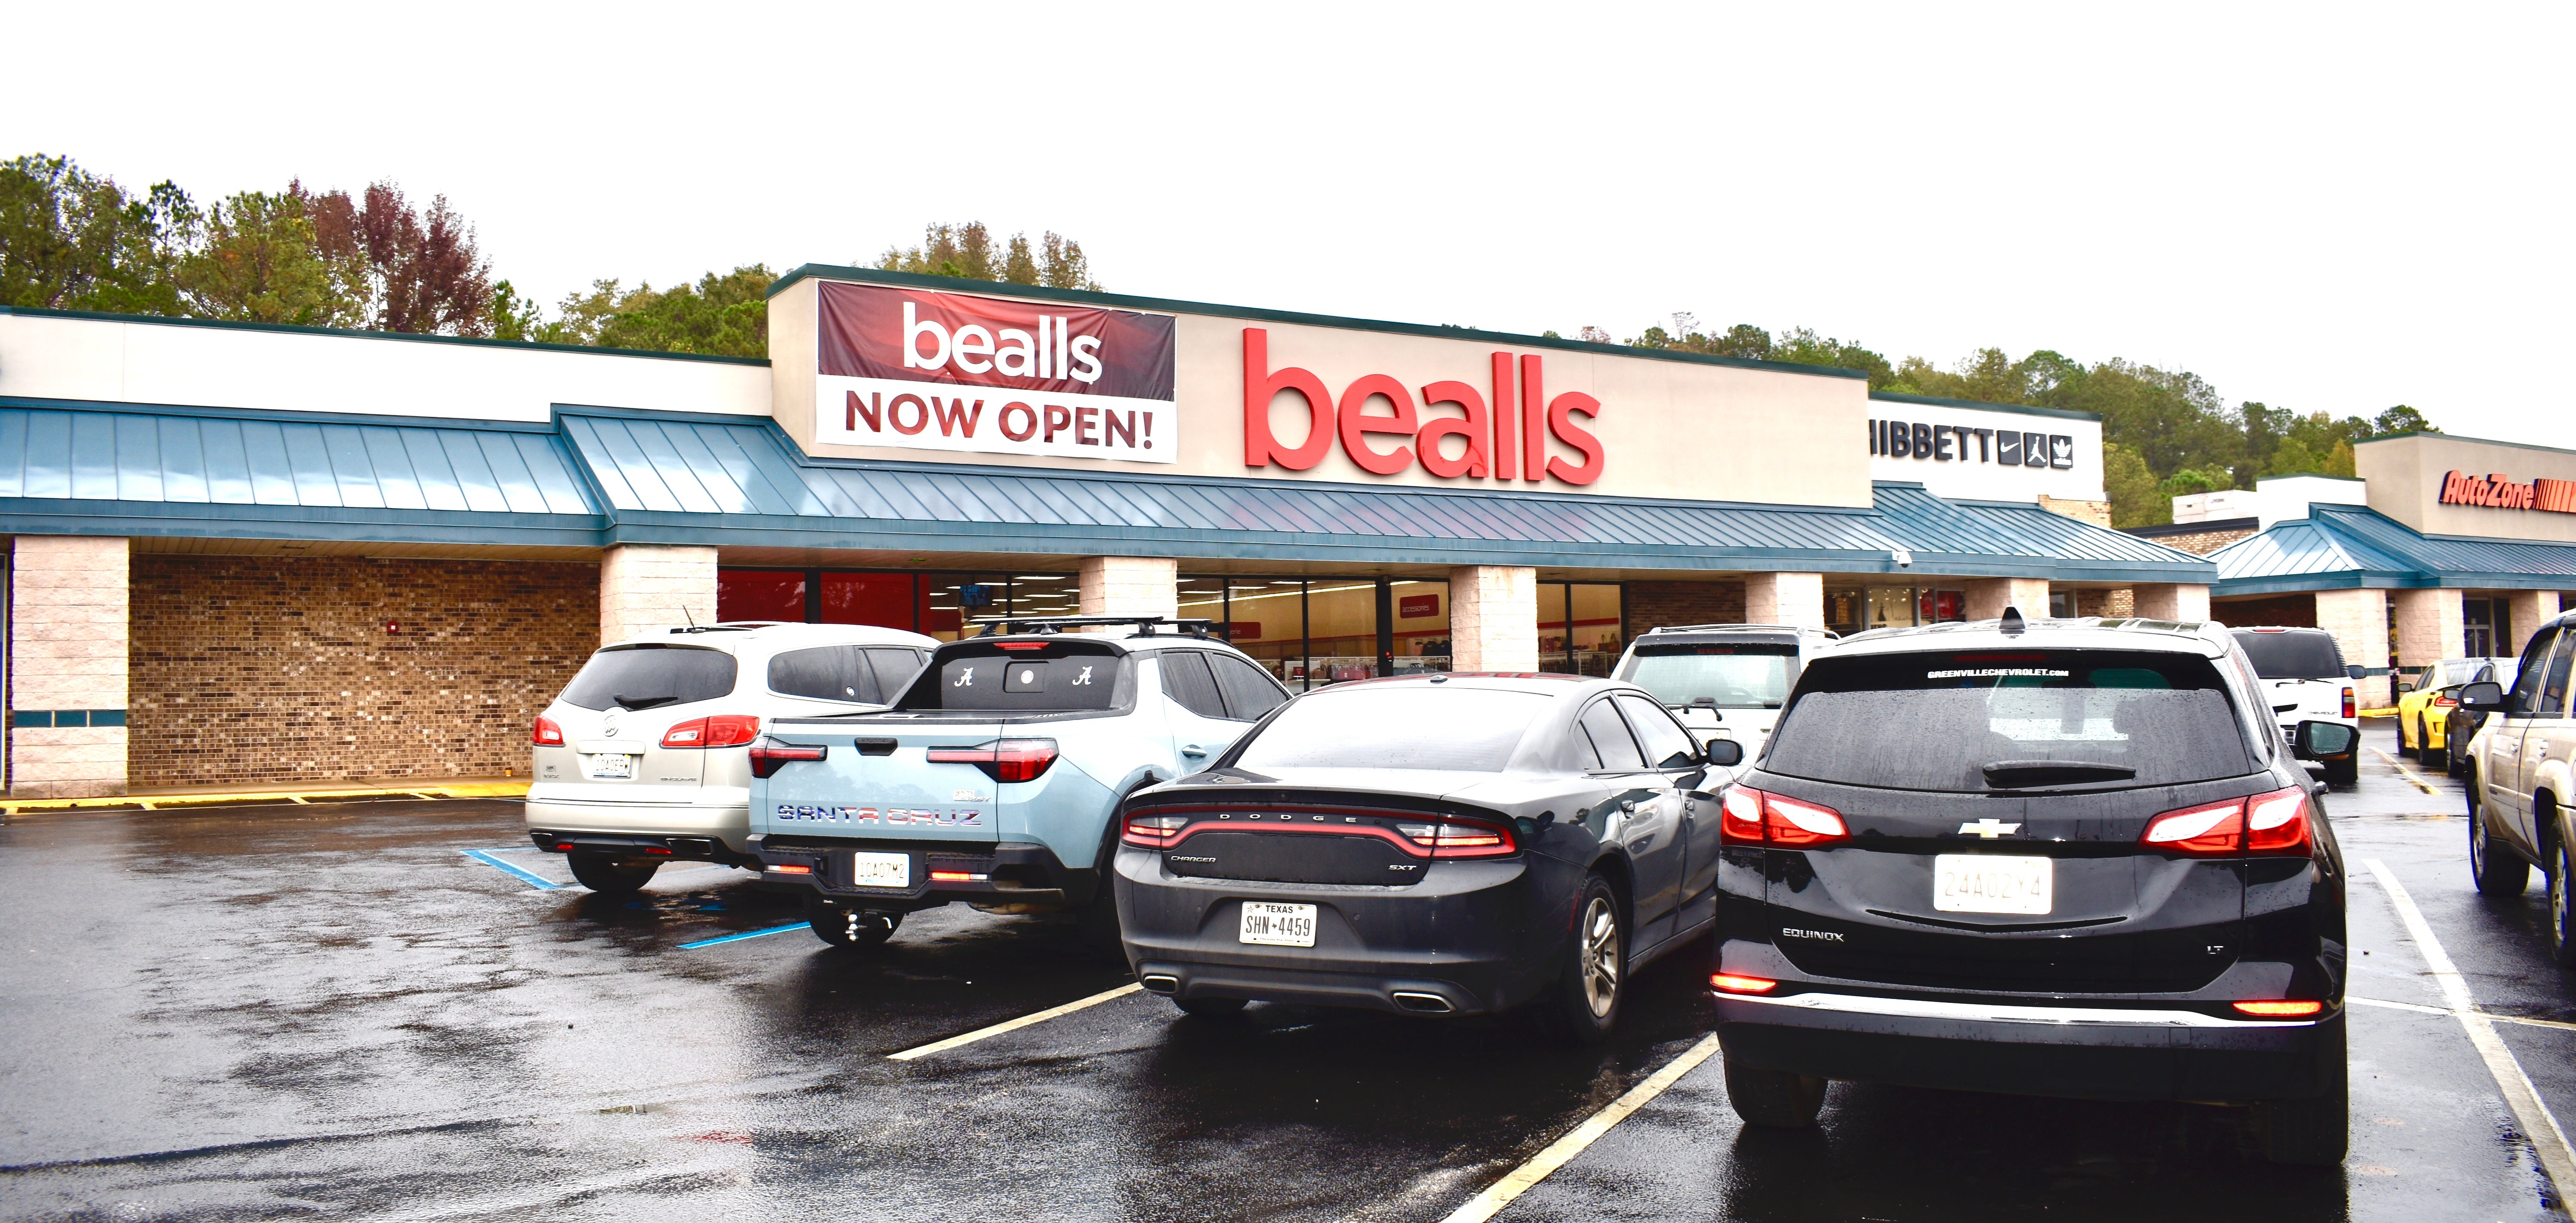 Bealls Outlet draws crowd at opening - The Greenville Advocate